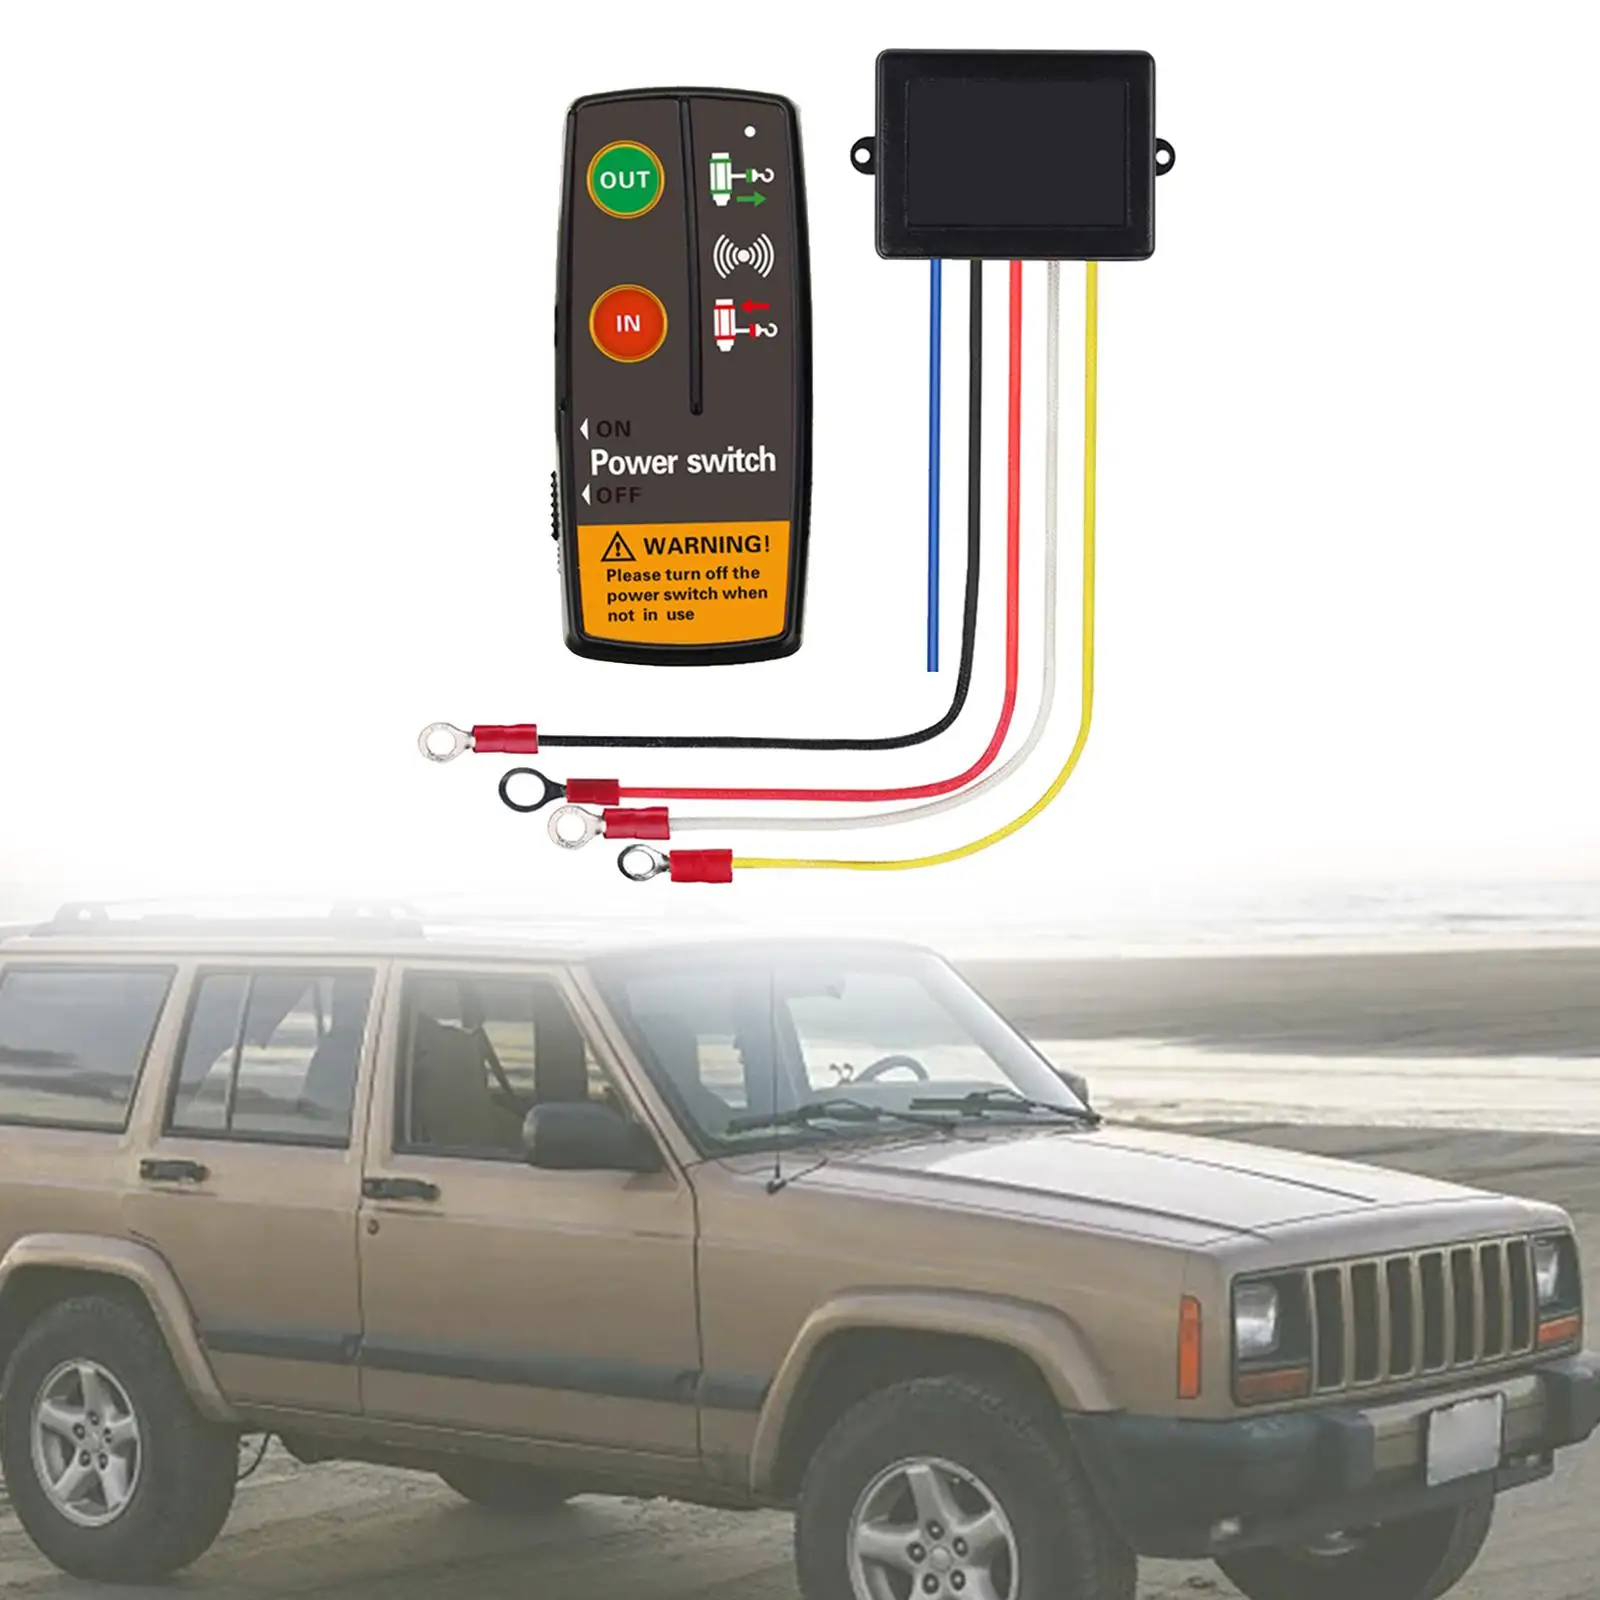 Wireless Winch Remote Control Set Repair Replaces for Truck ATV